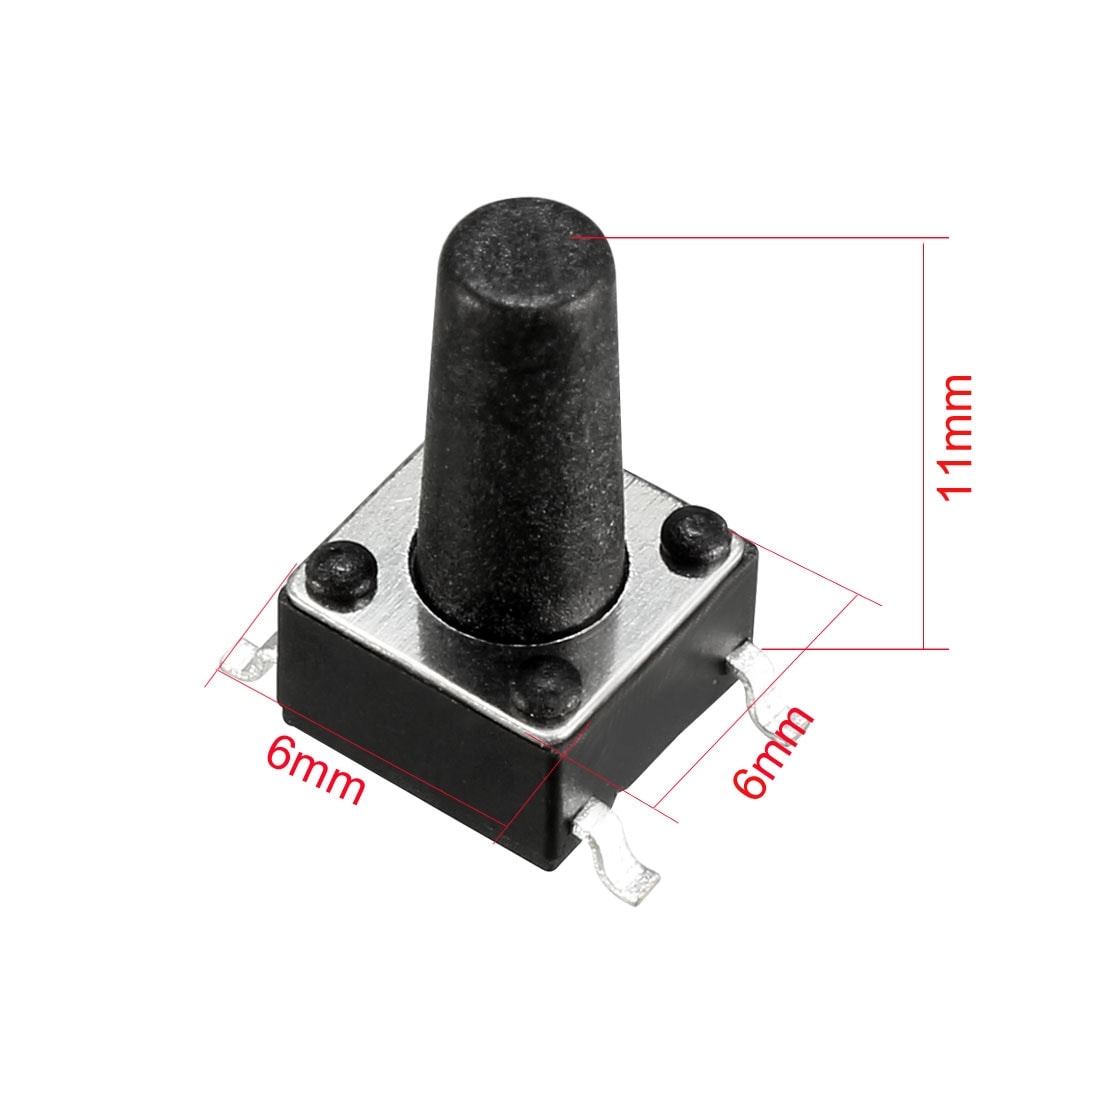 100xMomentary Tactile Touch Push Button Switch Surface Mount SMD SMT 3x4x2mm 